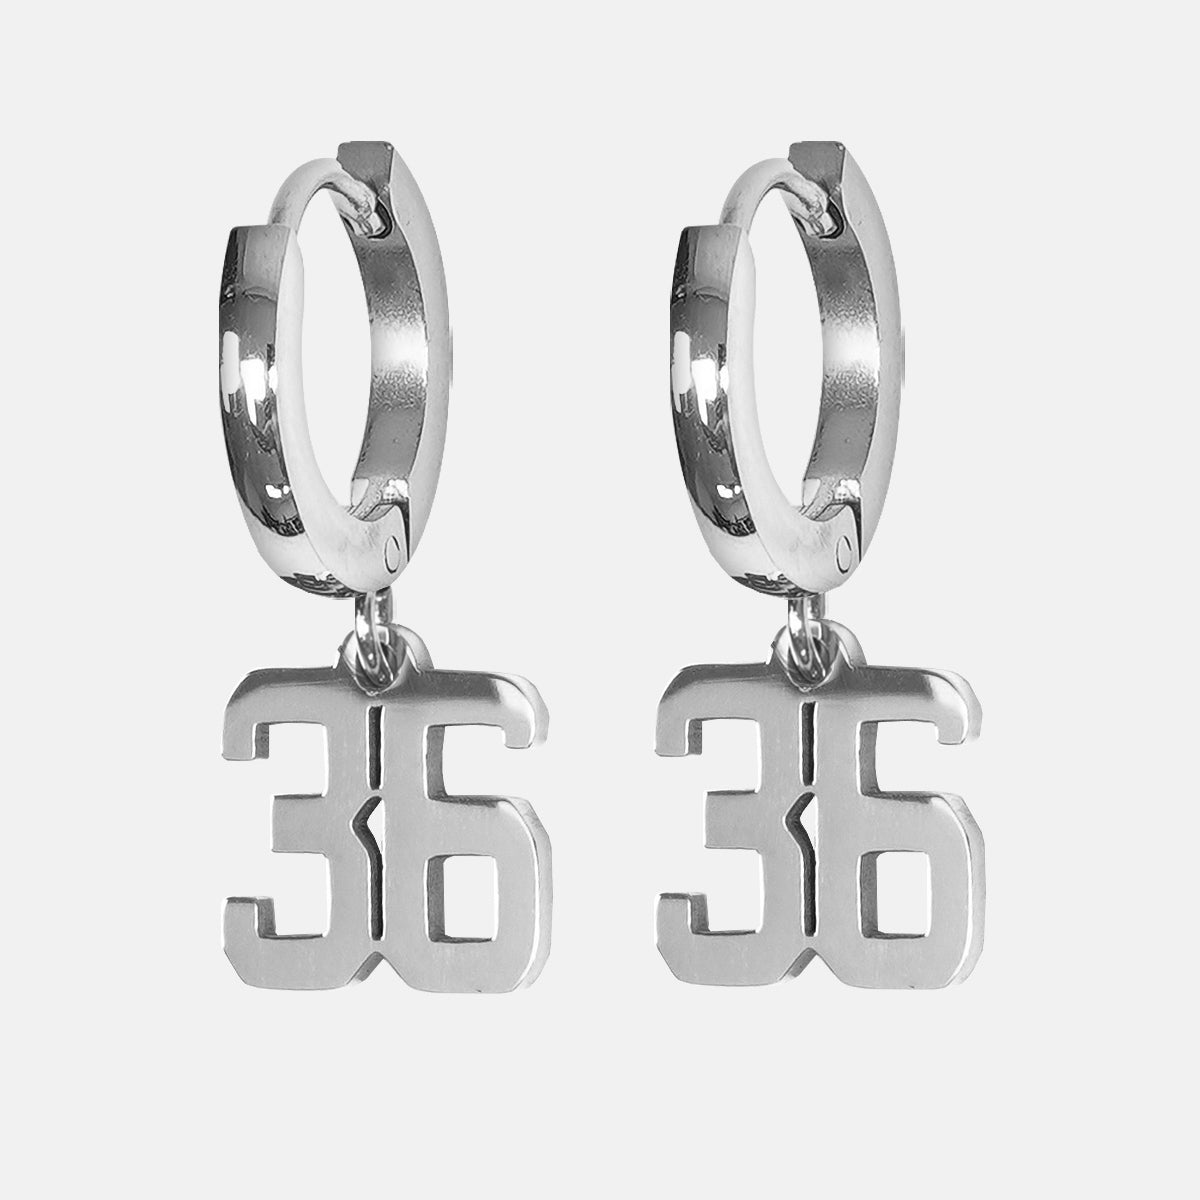 36 Number Earring - Stainless Steel